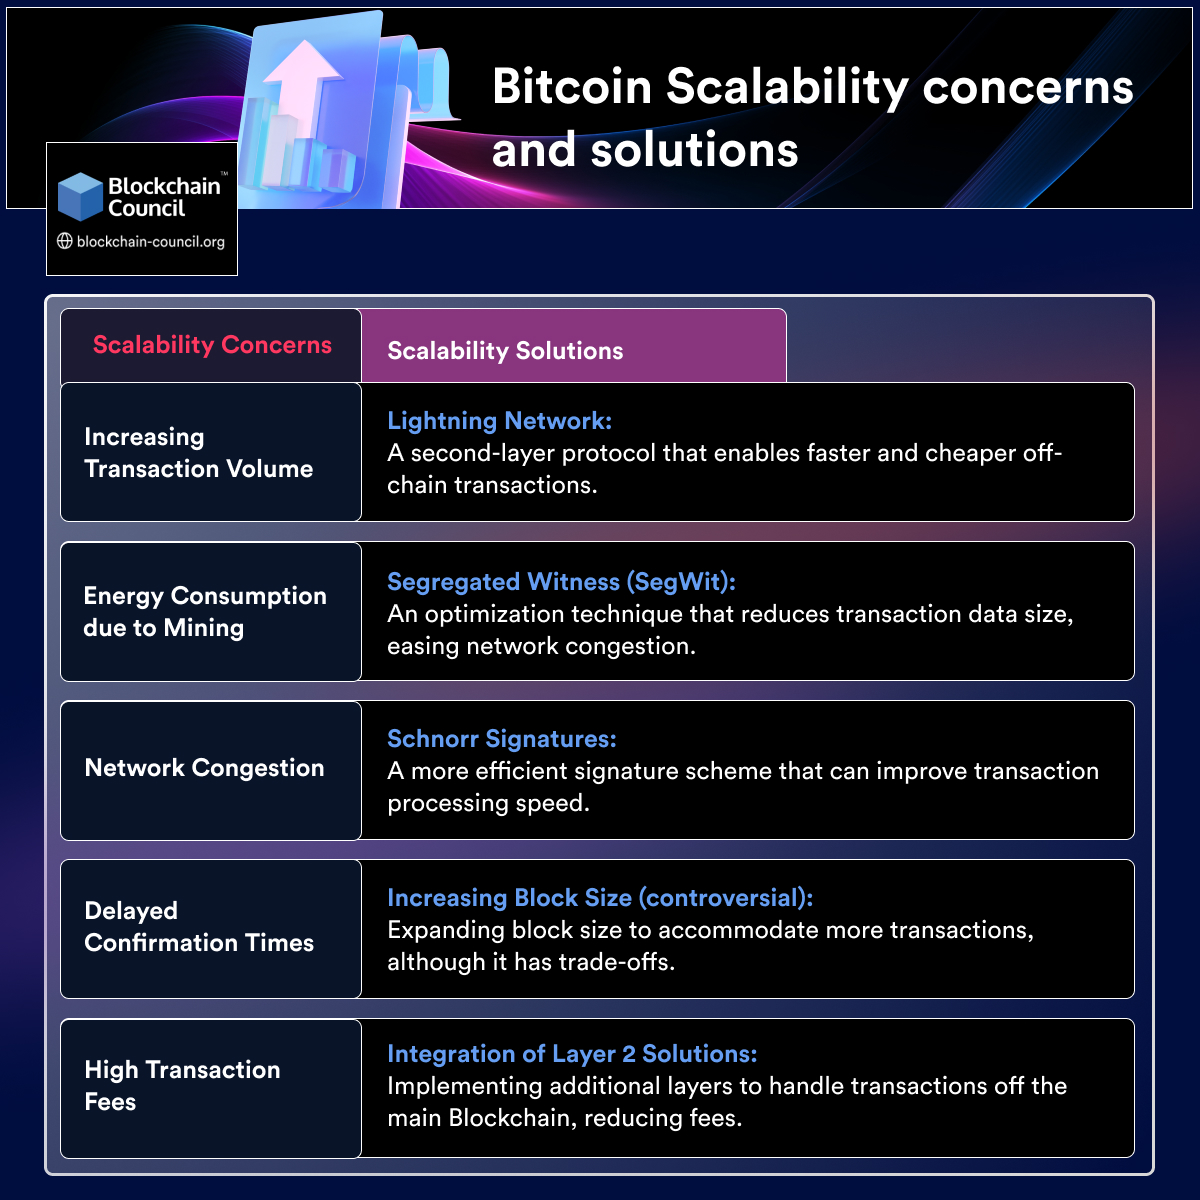 Scalability concerns and solutions